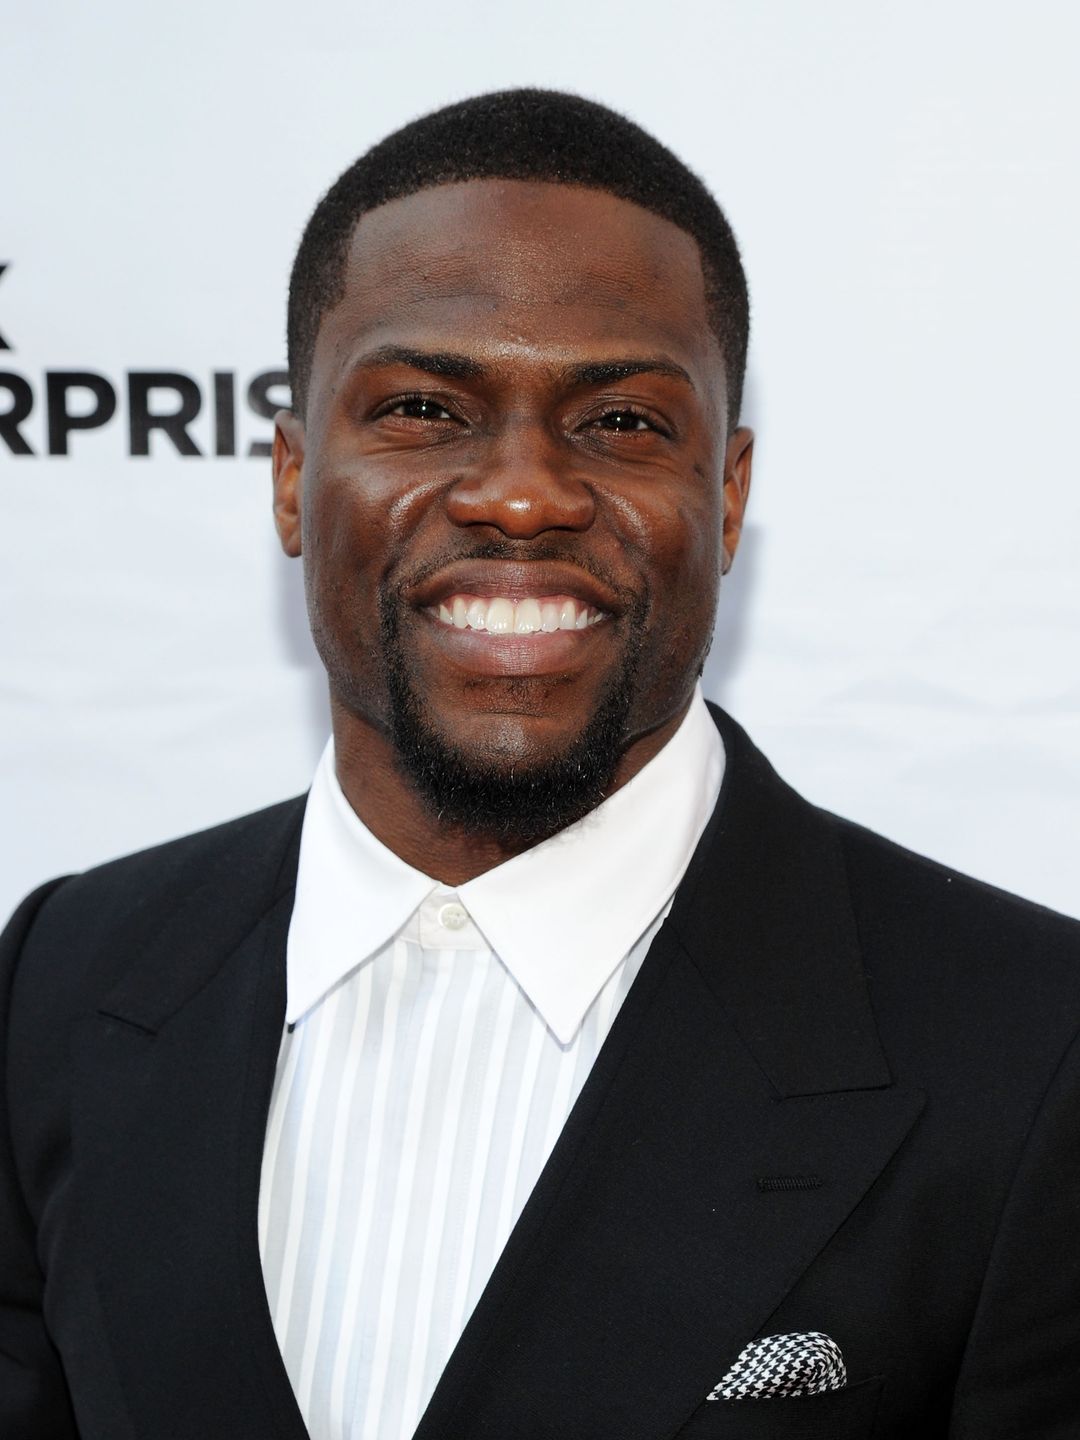 Kevin Hart does he have kids